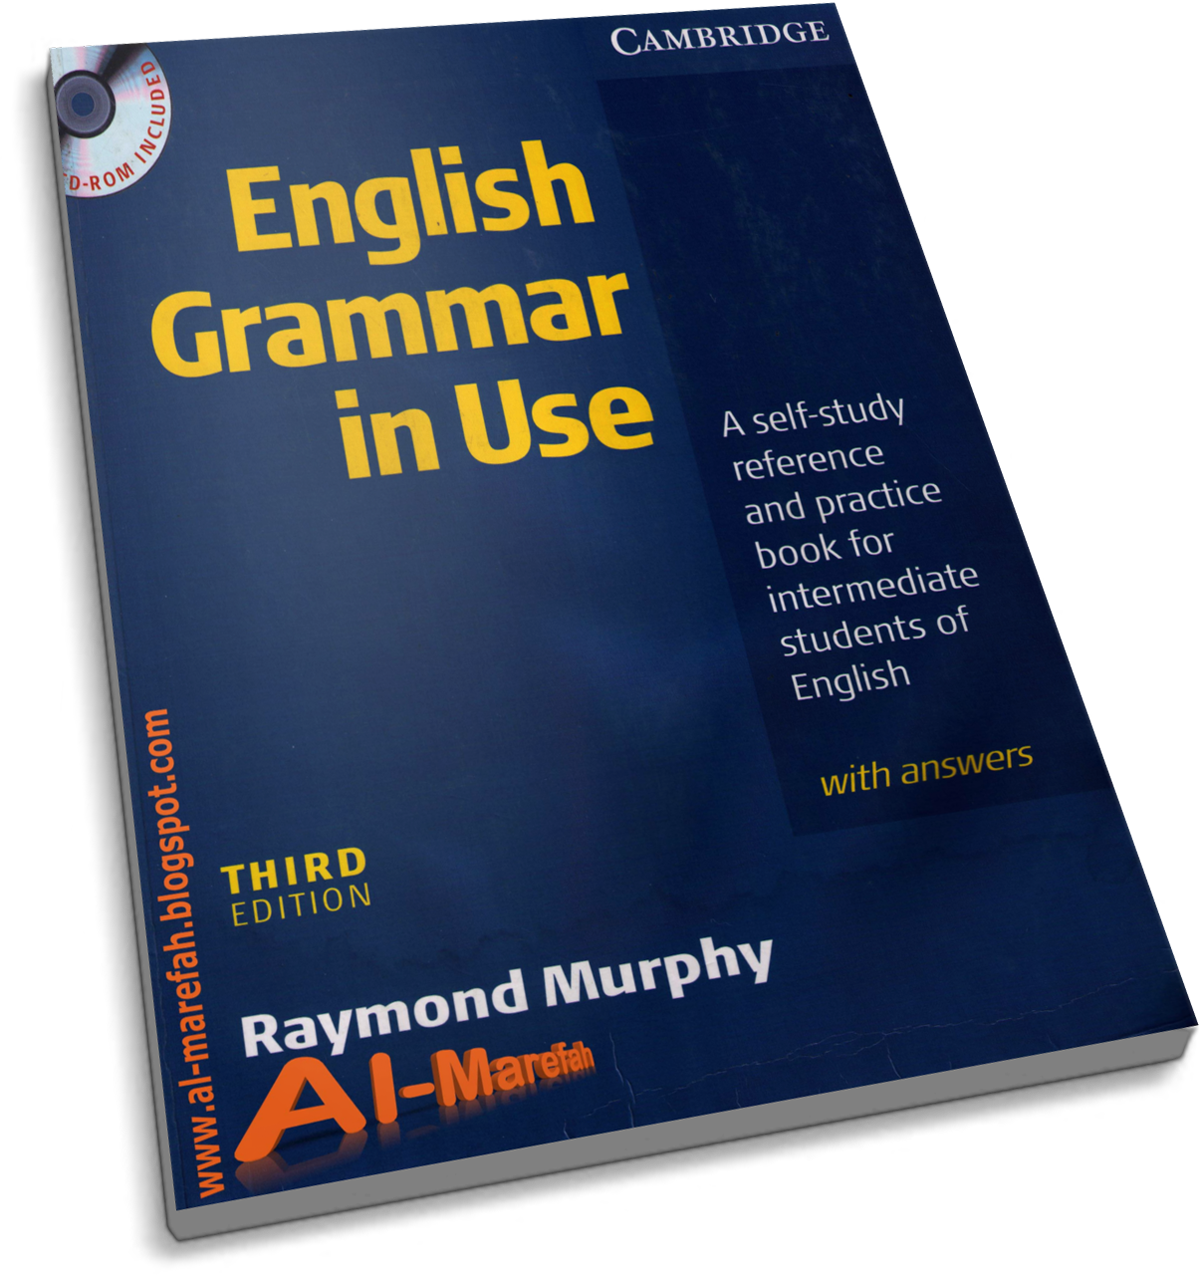 research about english grammar